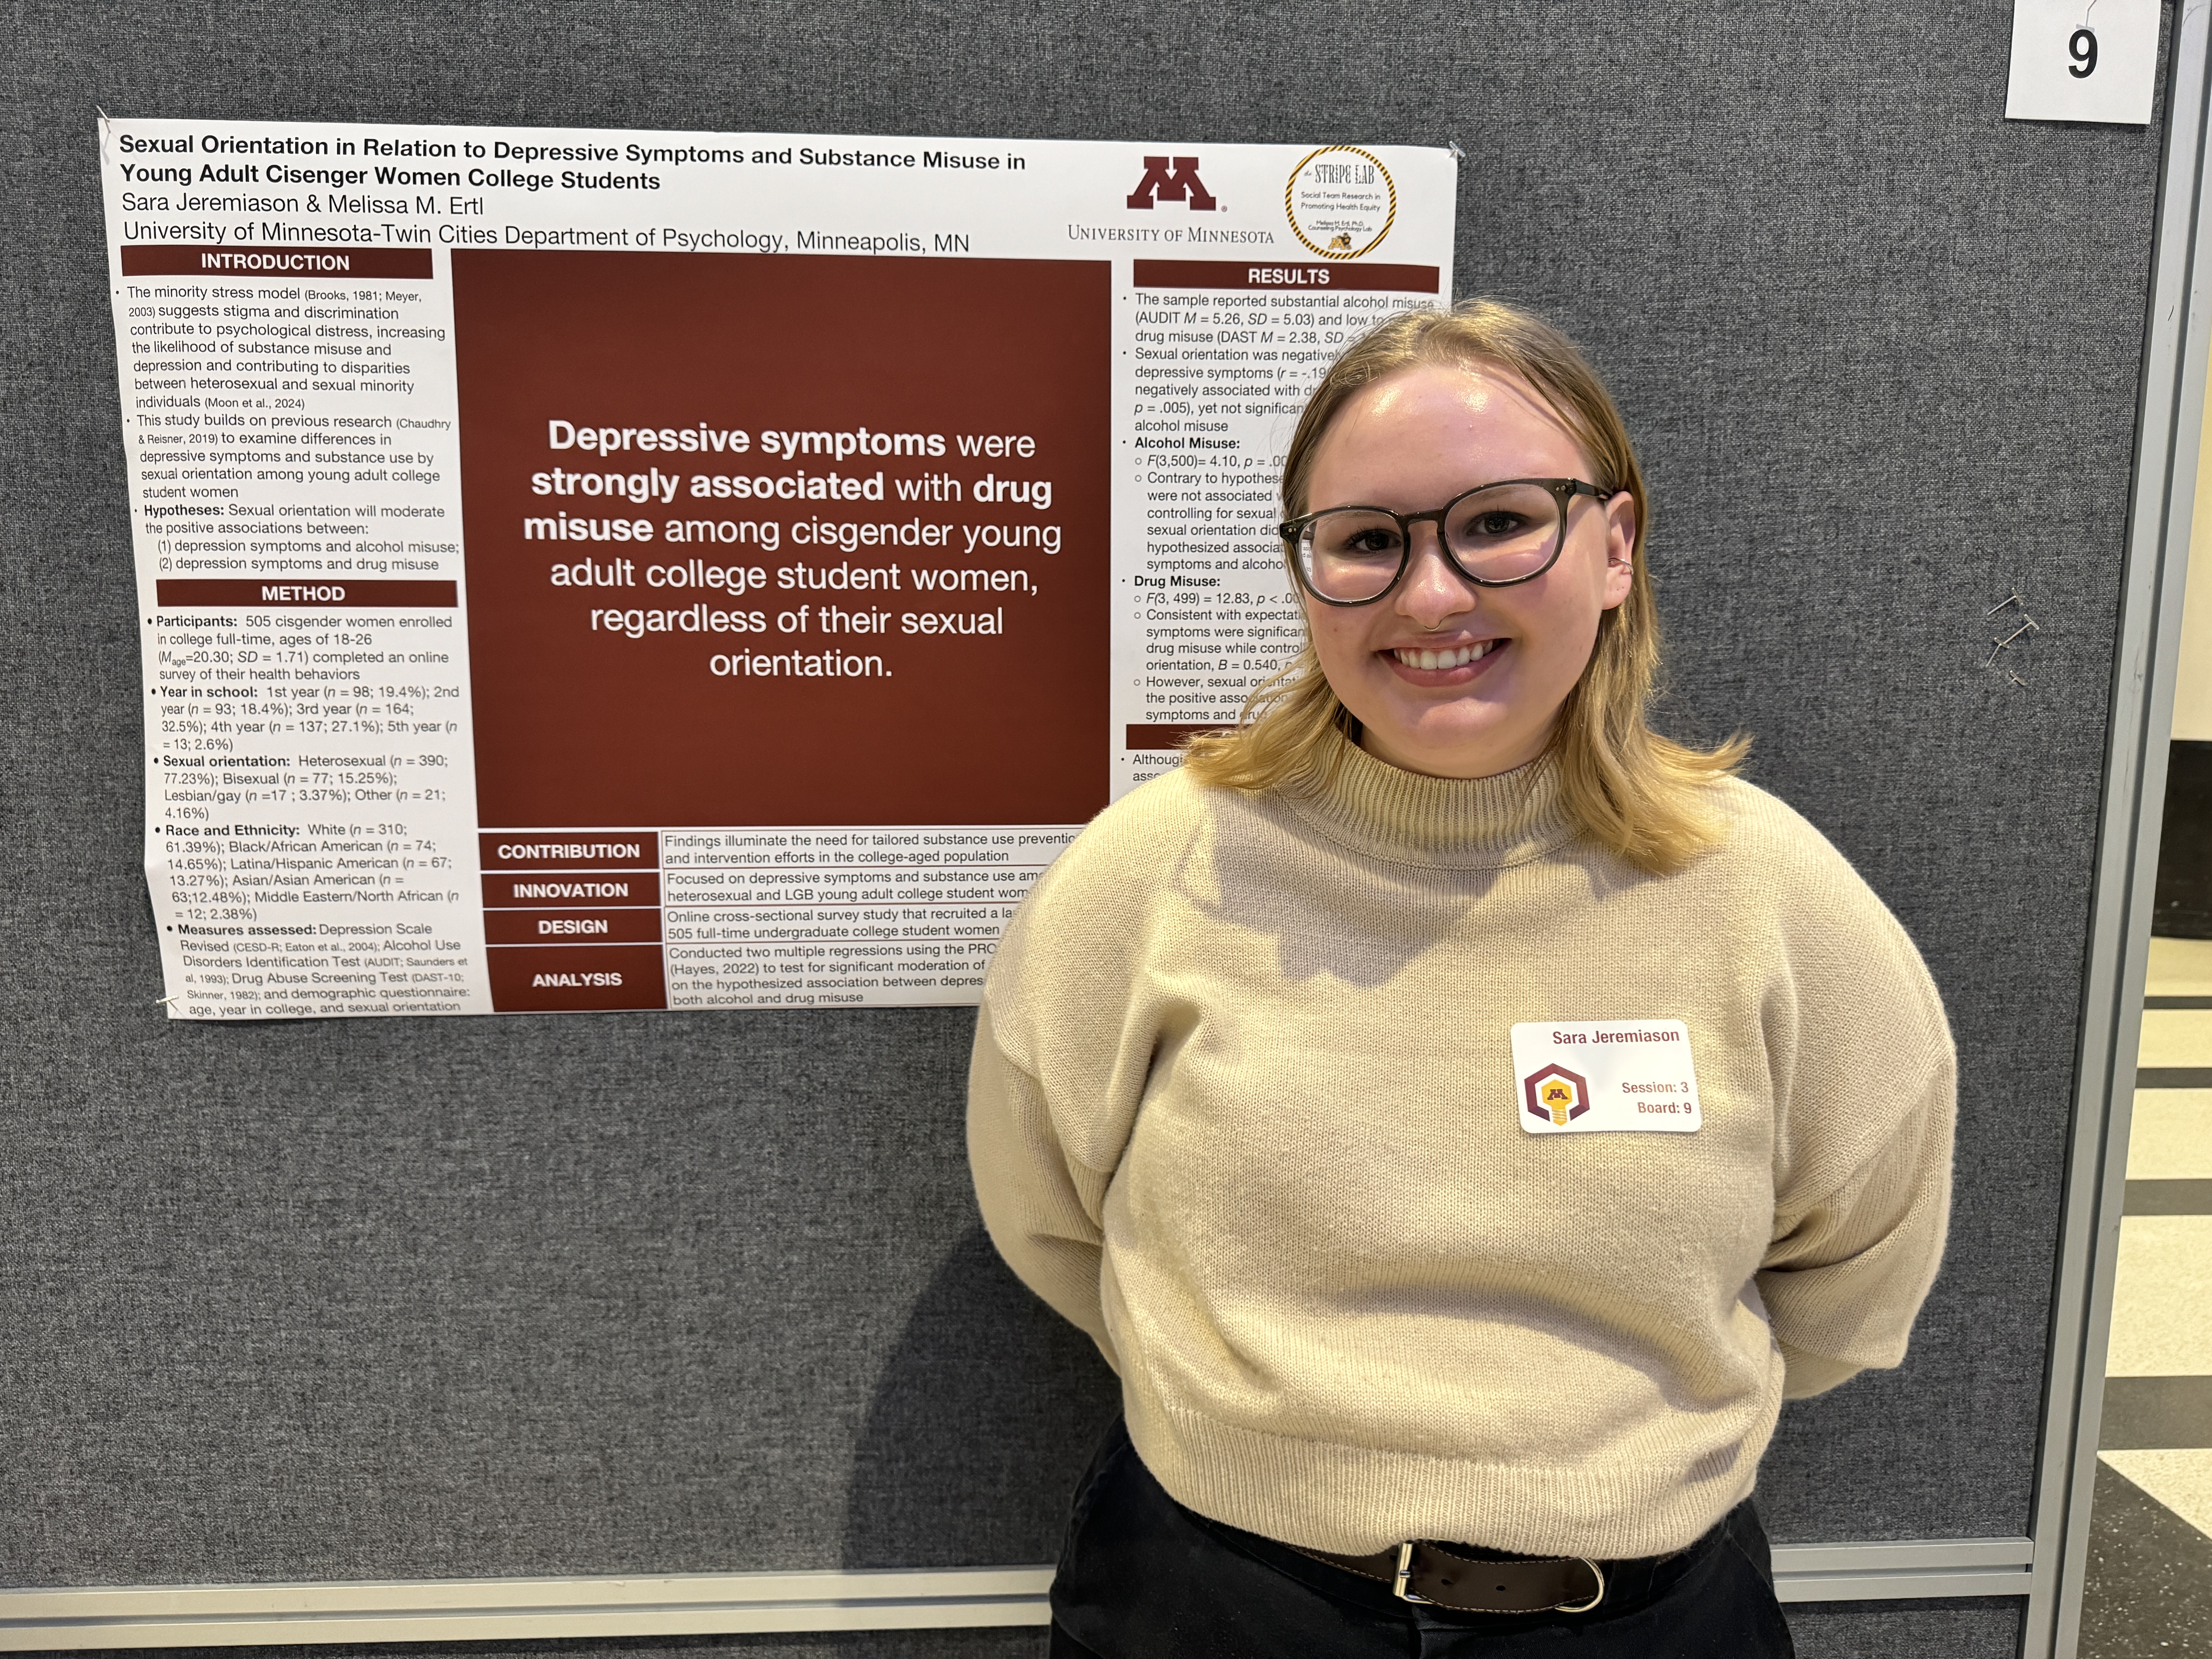 Sara Jeremiason presents her research on alcohol and drug misuse in relation to depression in cisgender women college students who are heterosexual and lesbian, gay, and bisexual.